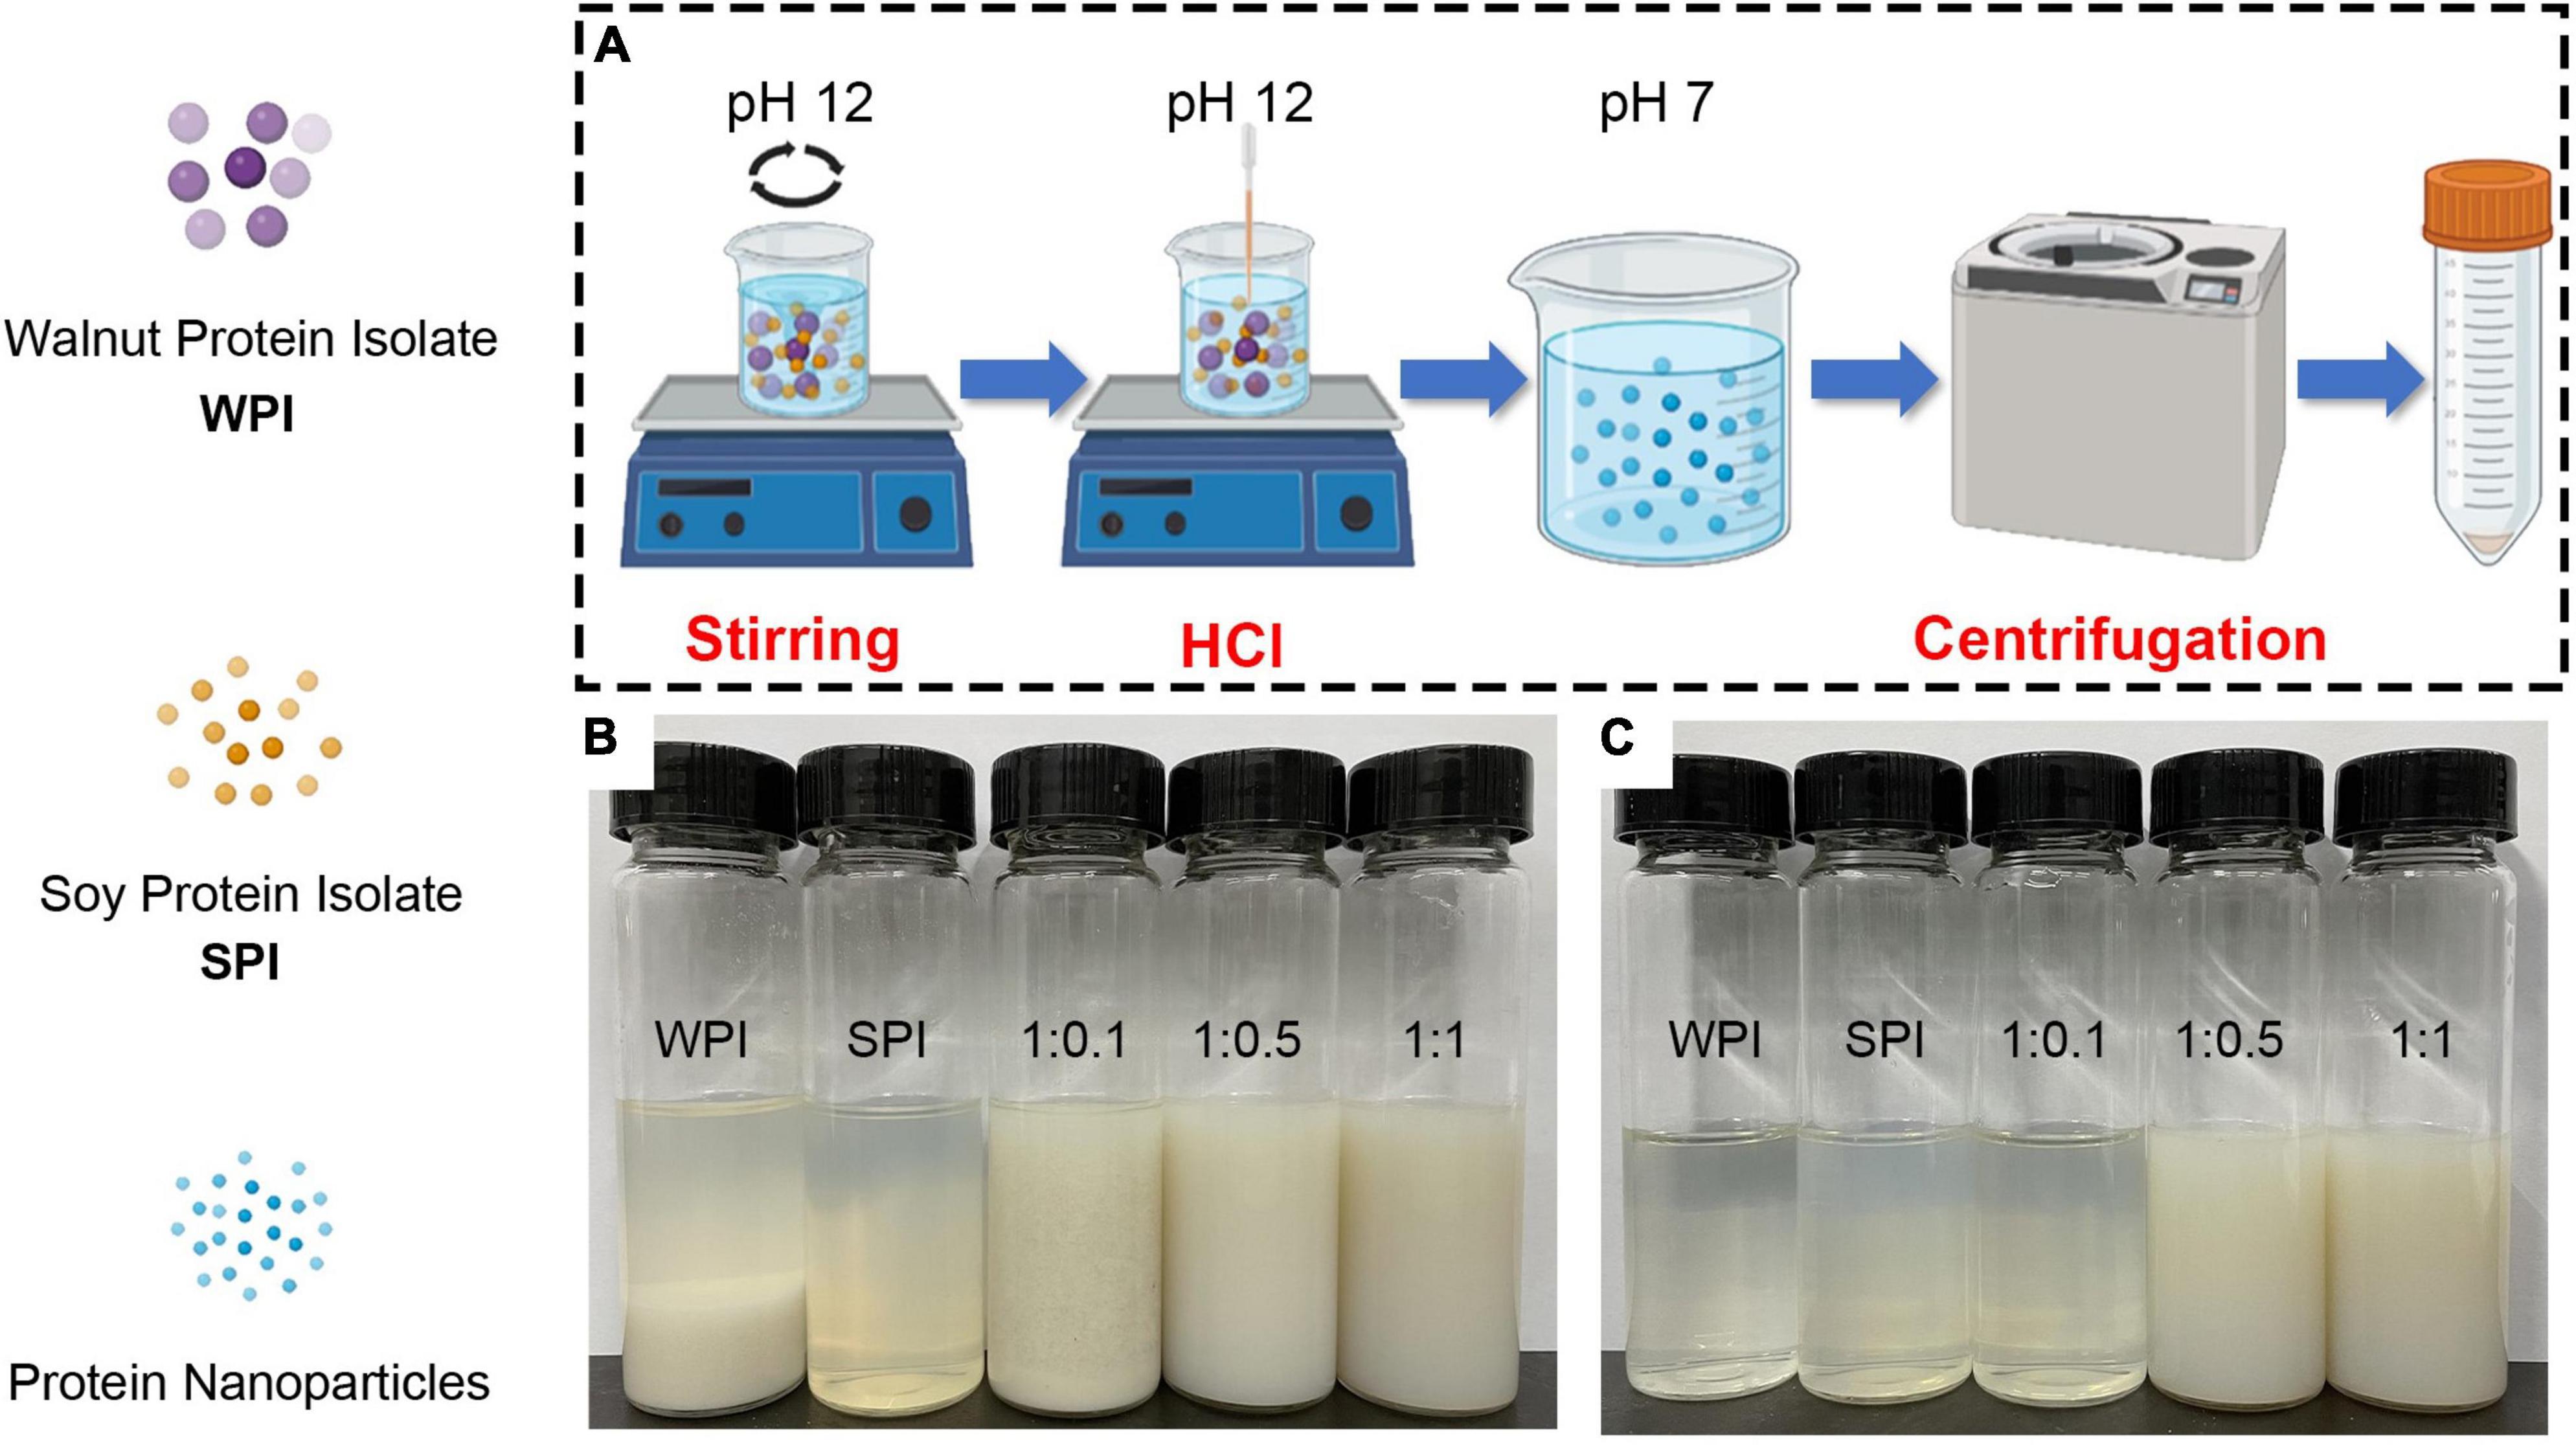 Formation mechanism and functional properties of walnut protein isolate and soy protein isolate nanoparticles using the pH-cycle technology